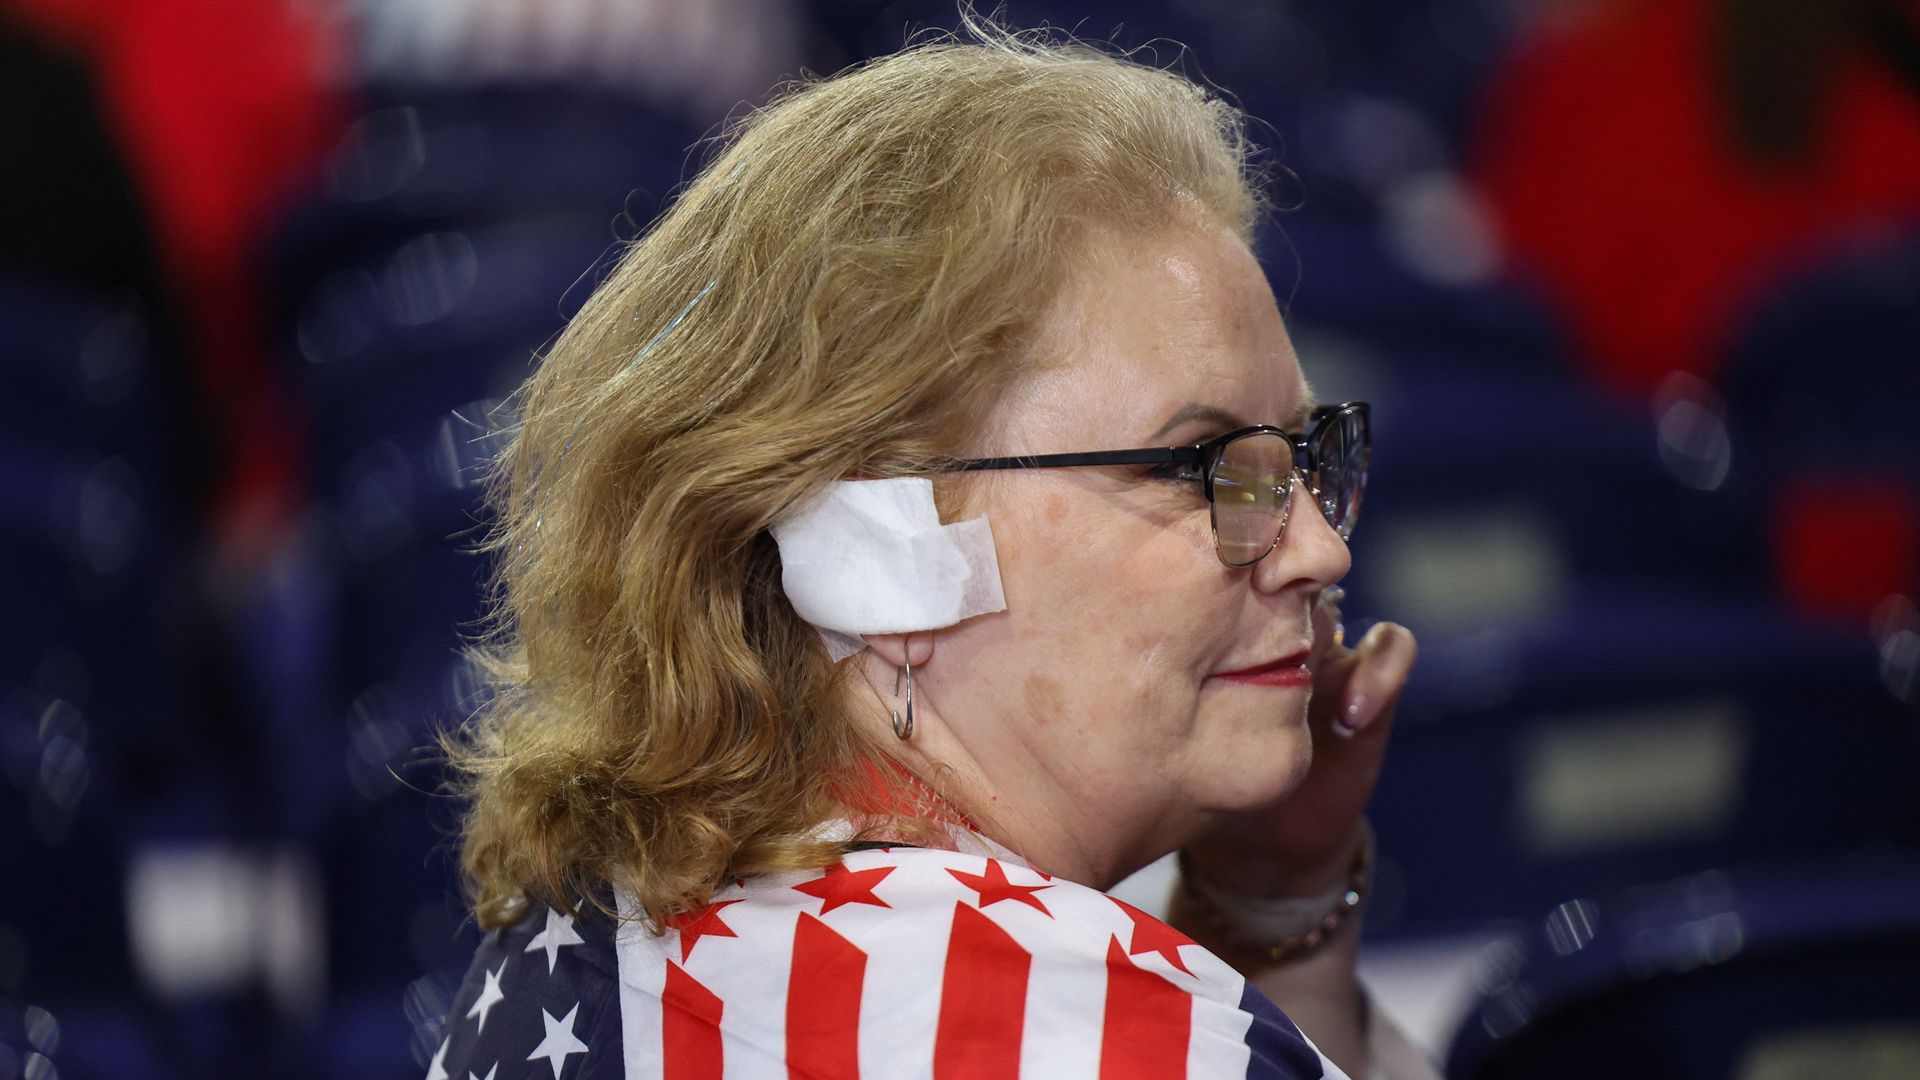 Trump supporters wear fake ear bandages after shooting